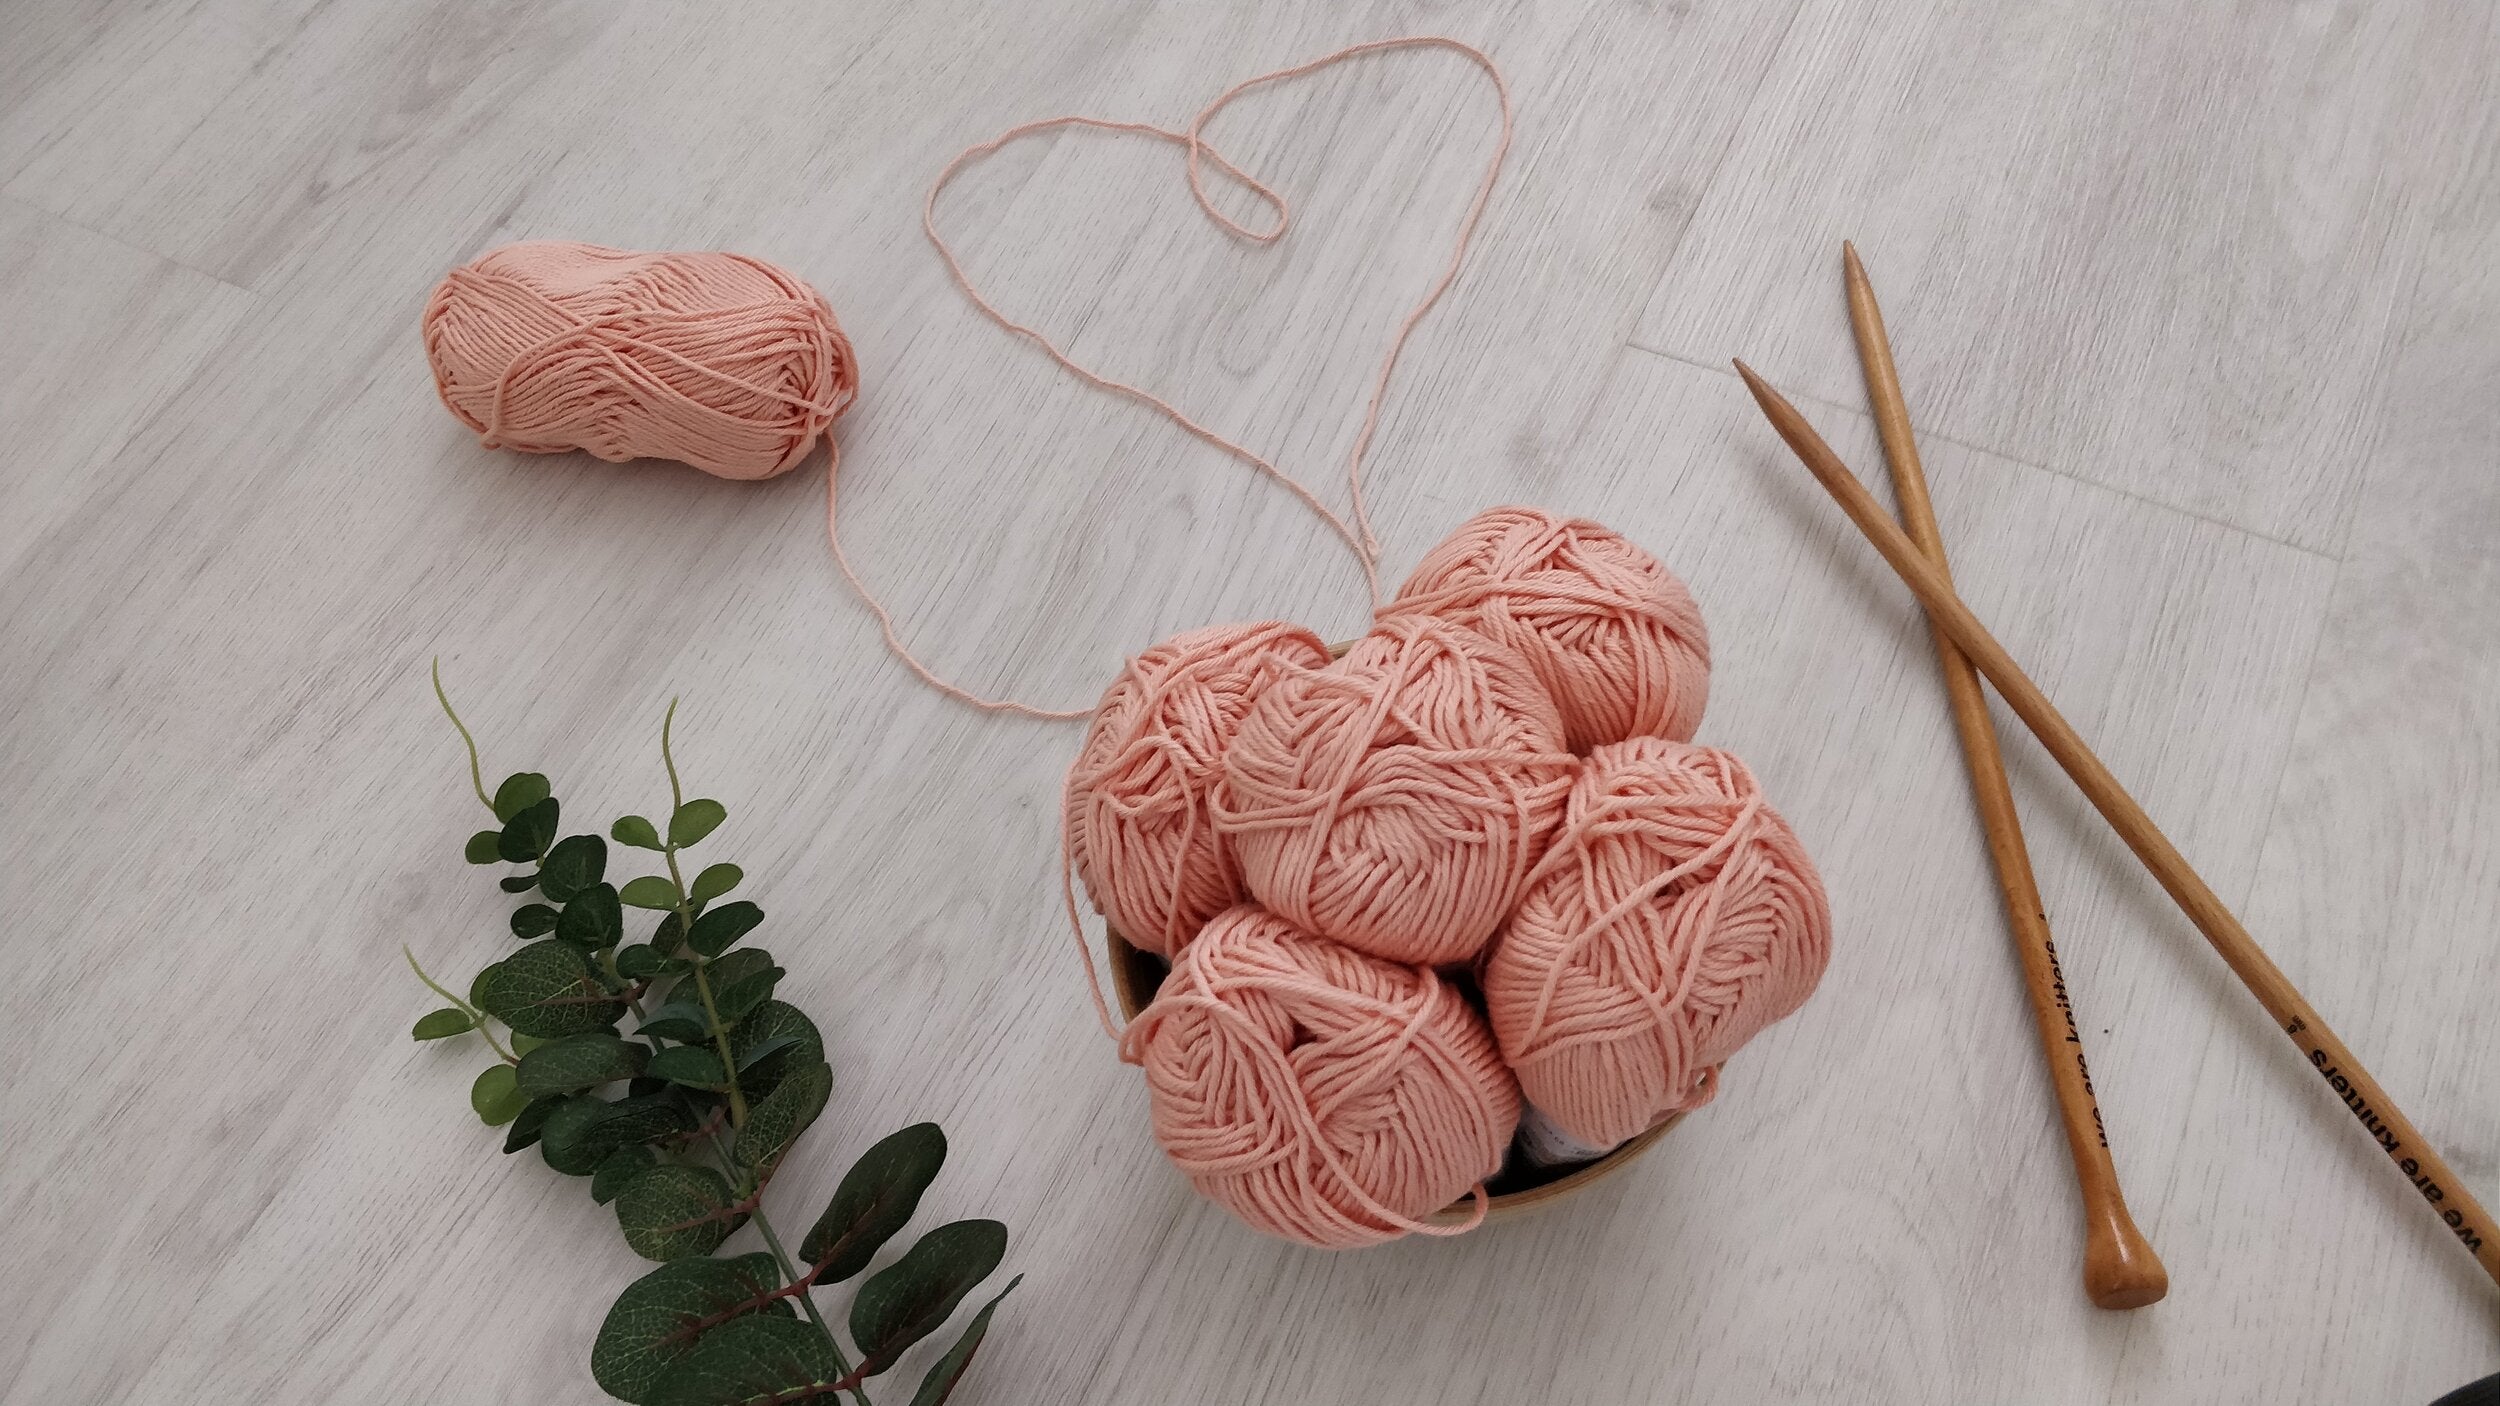 The top 5 Benefits of Crafting as a Form of Self Care